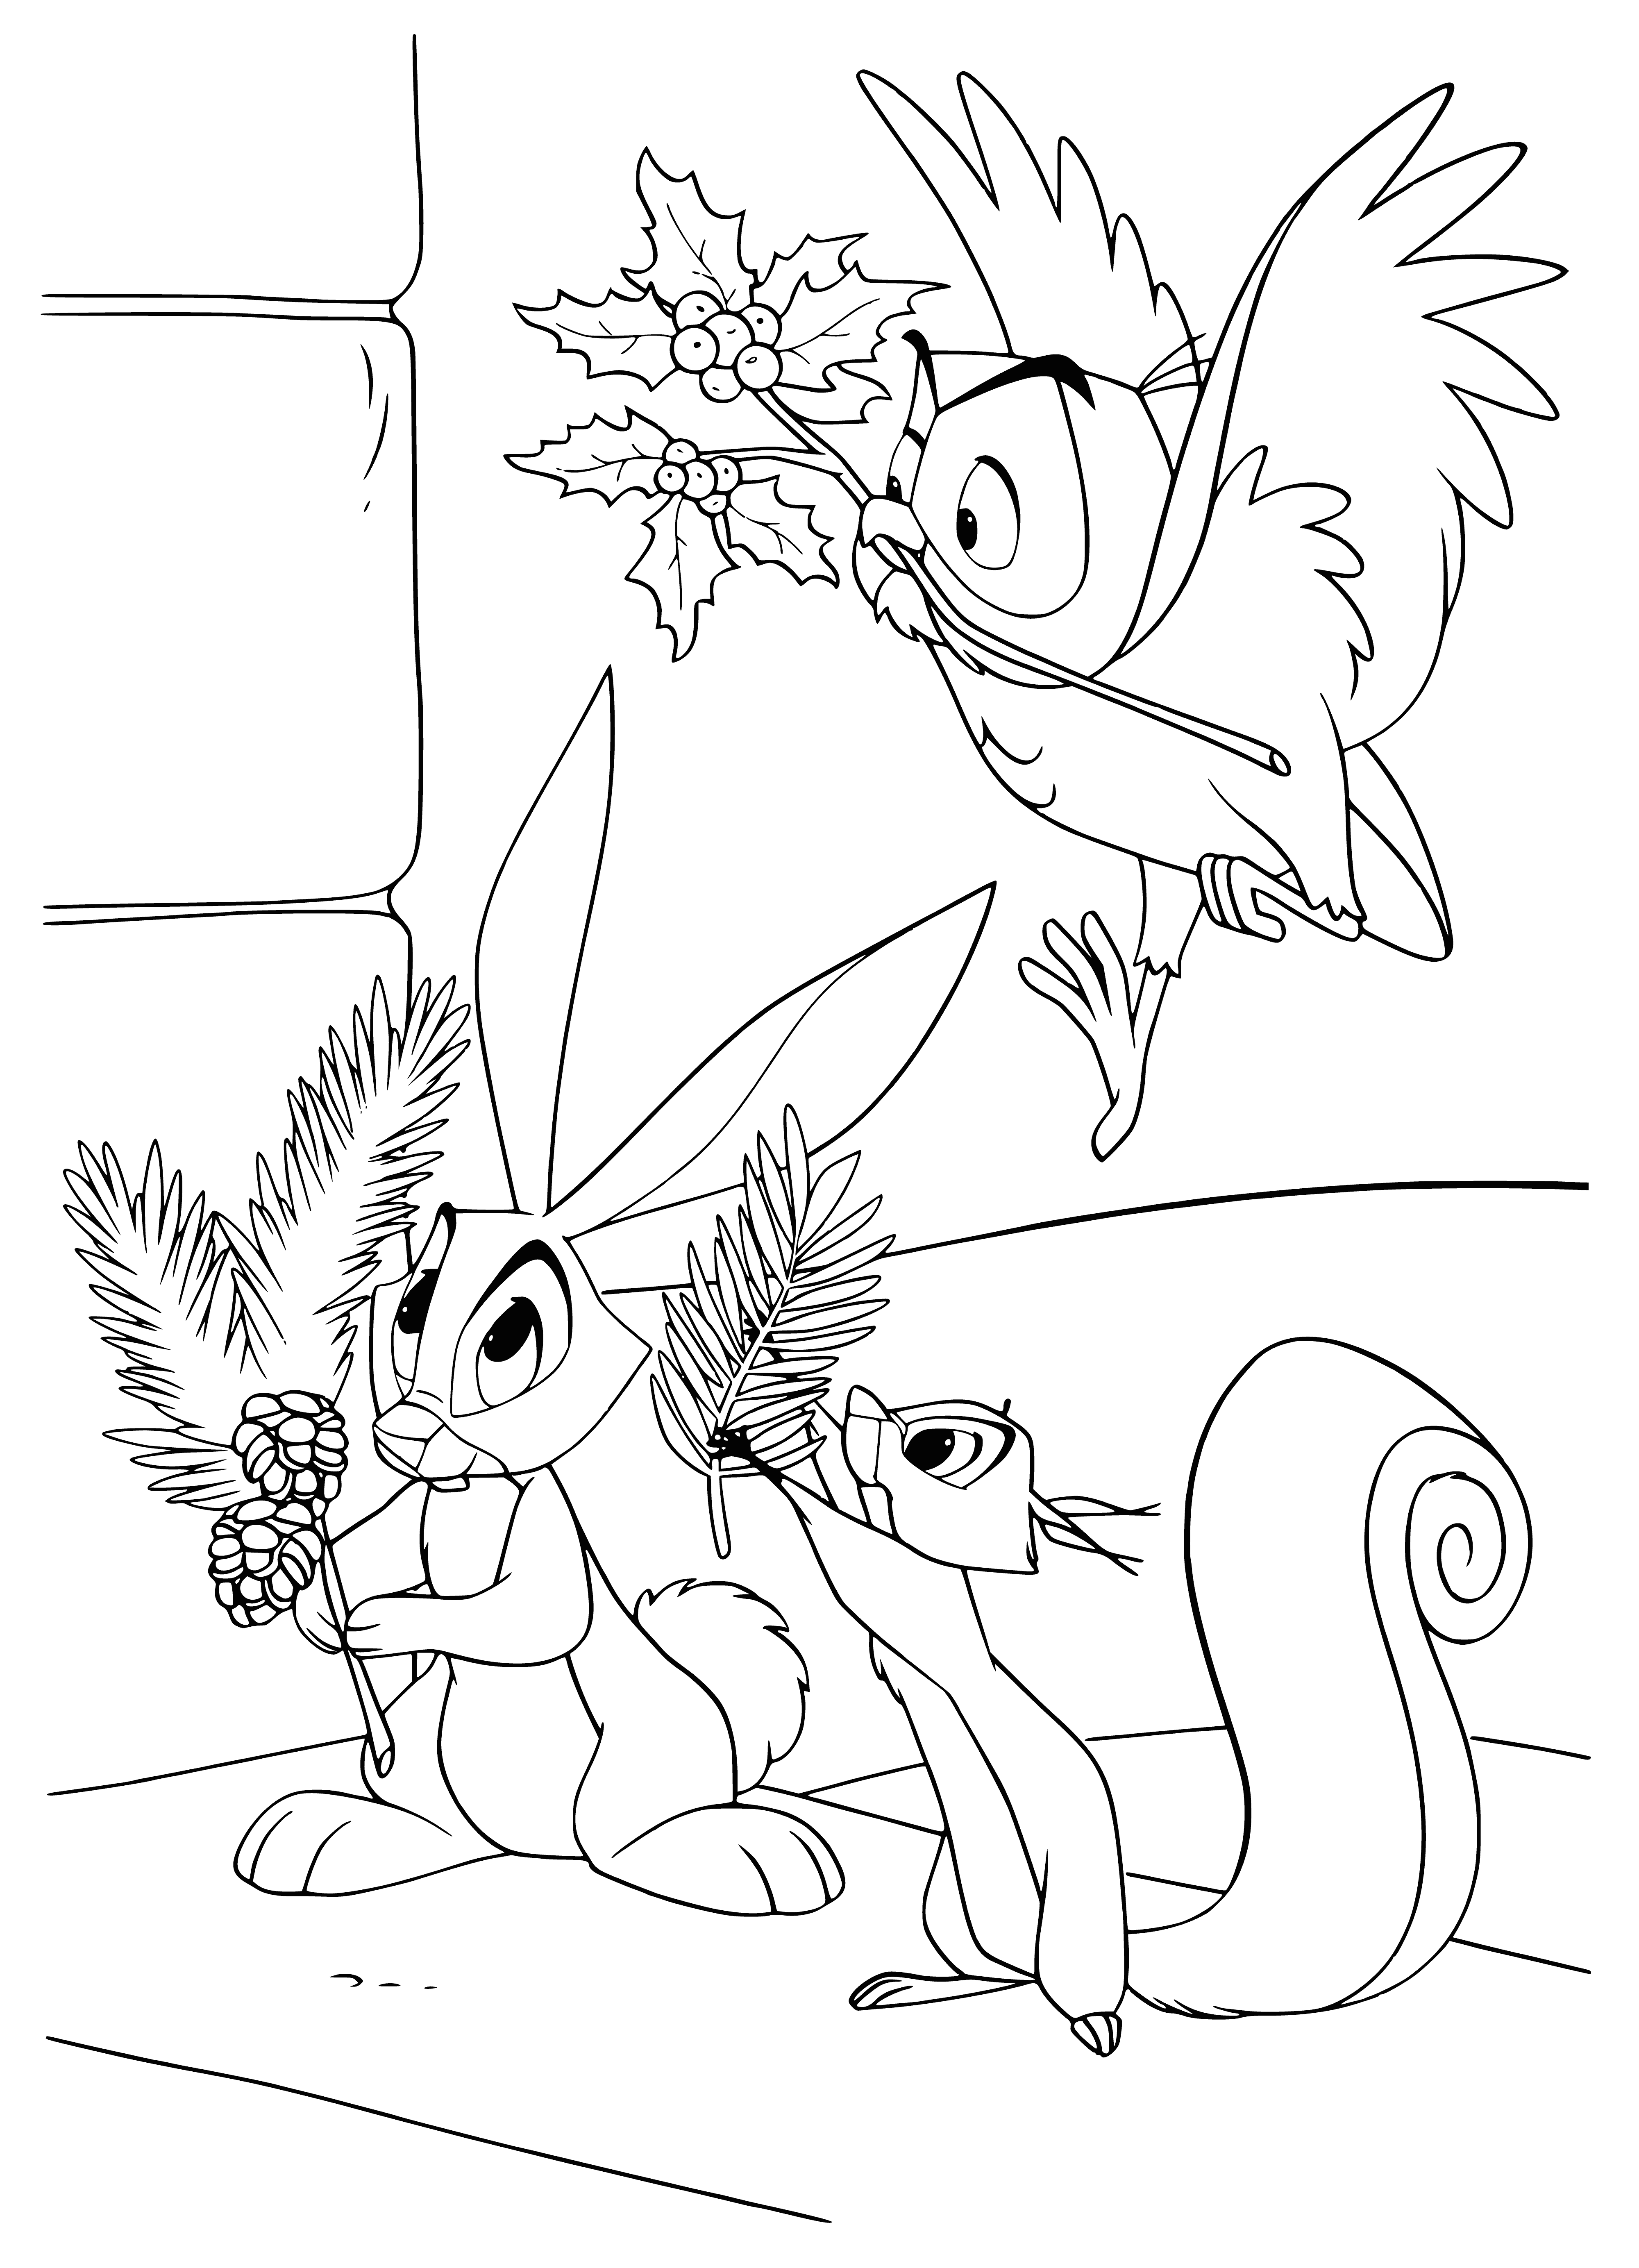 coloring page: Animals in Disney coloring page prep for winter; wearing extra fur and gathering food. All seem excited for the new year!